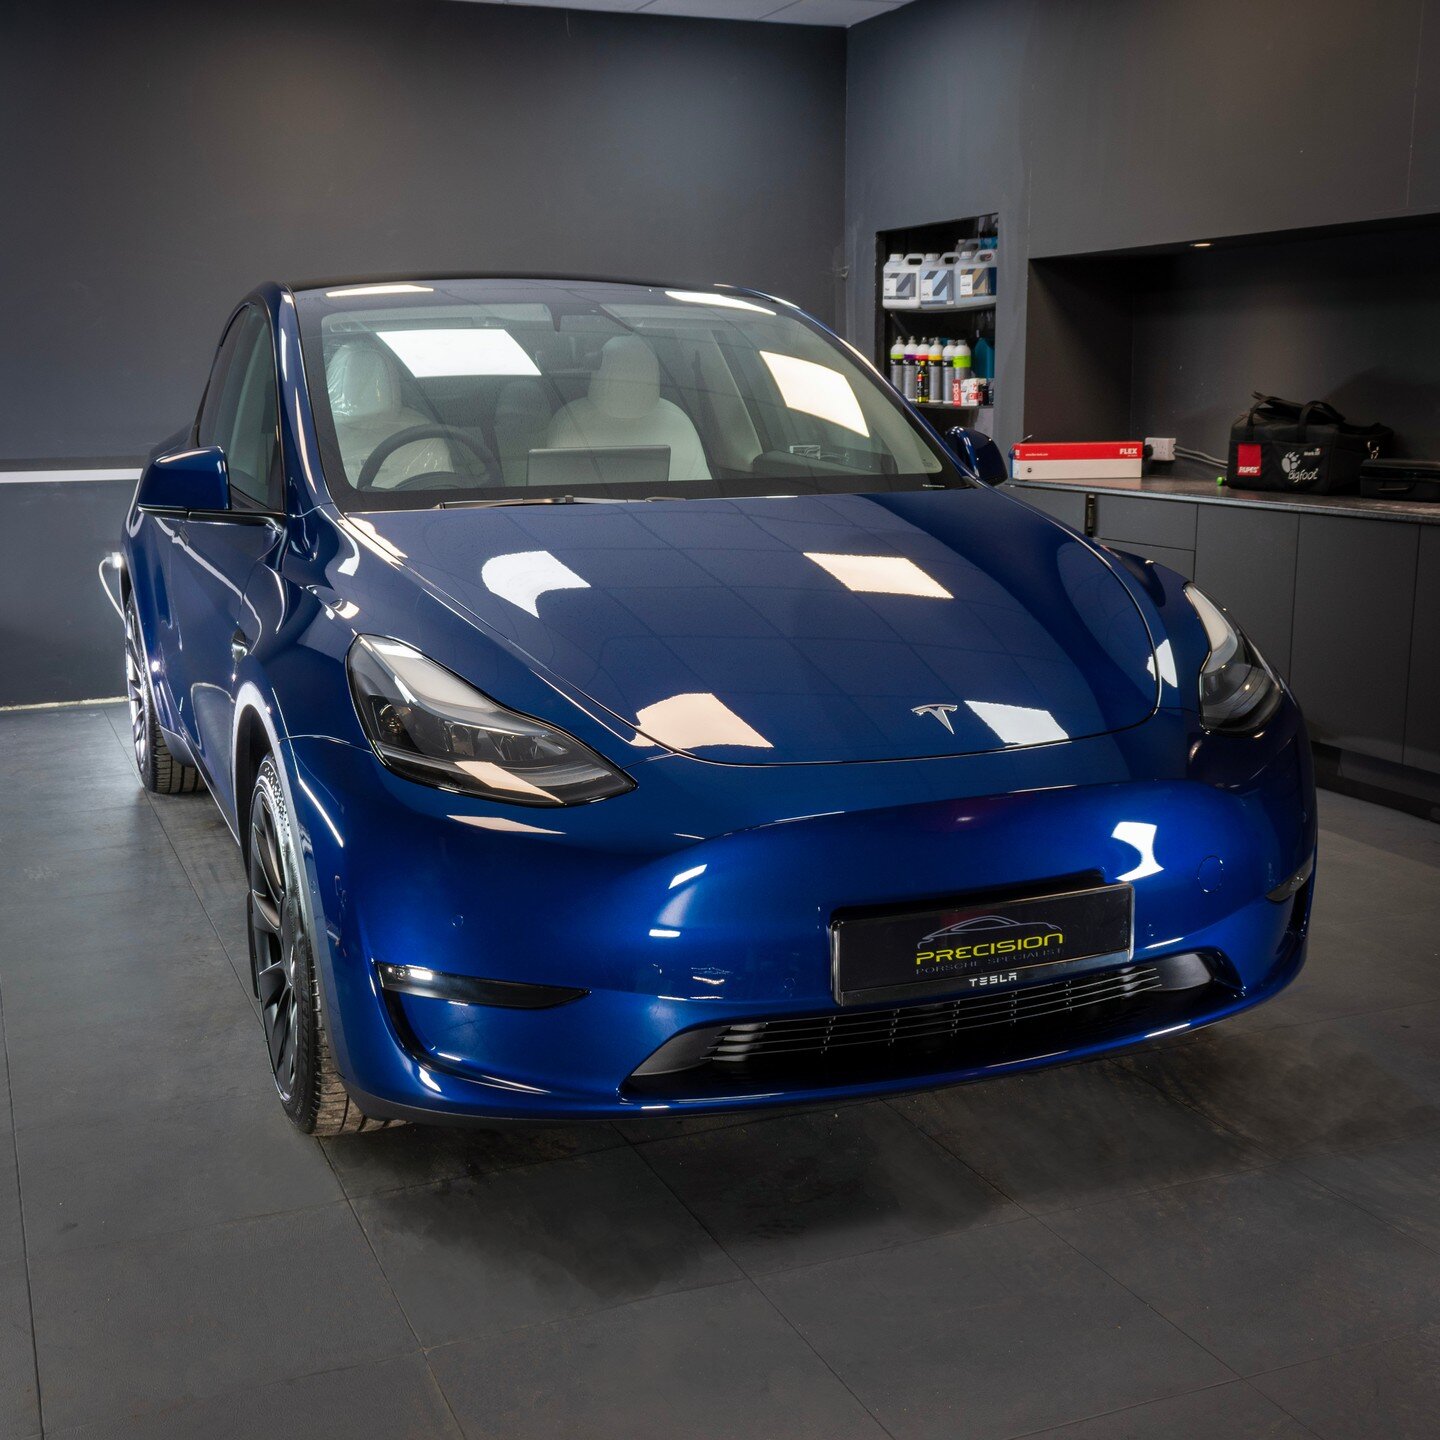 Did you know we have a dedicated detailing studio? Our detailing packages are available to all makes &amp; models. 

Straight from the showroom This Tesla Model Y received 2-layers of Gtechniq EXOv4, giving up to 2 years of ceramic protection.

#Tesl